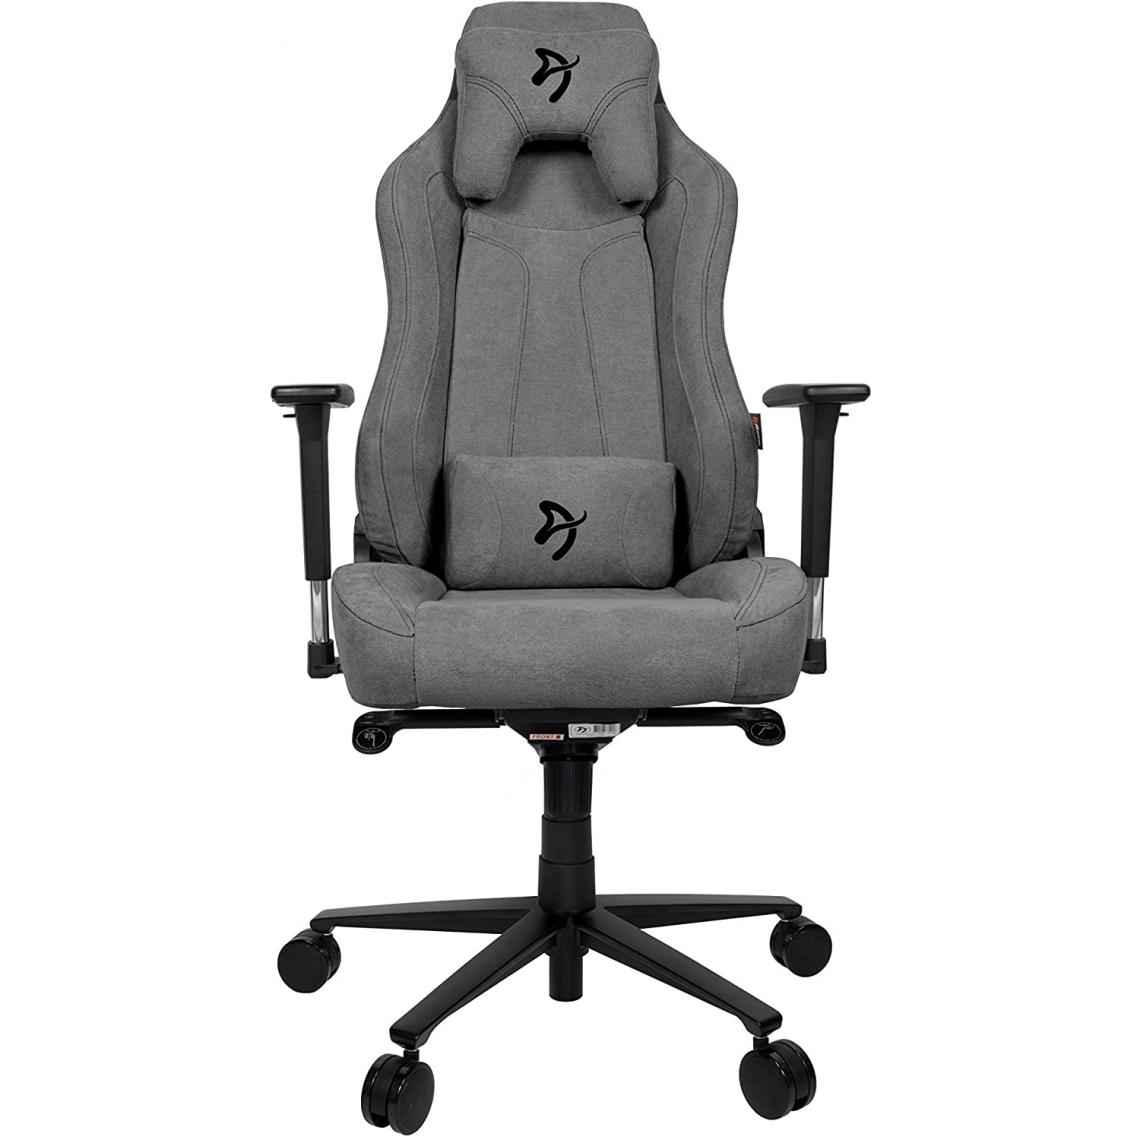 Arozzi - Fauteuil gaming Vernazza Arozzi Soft Fabric gris métal - Chaise gamer